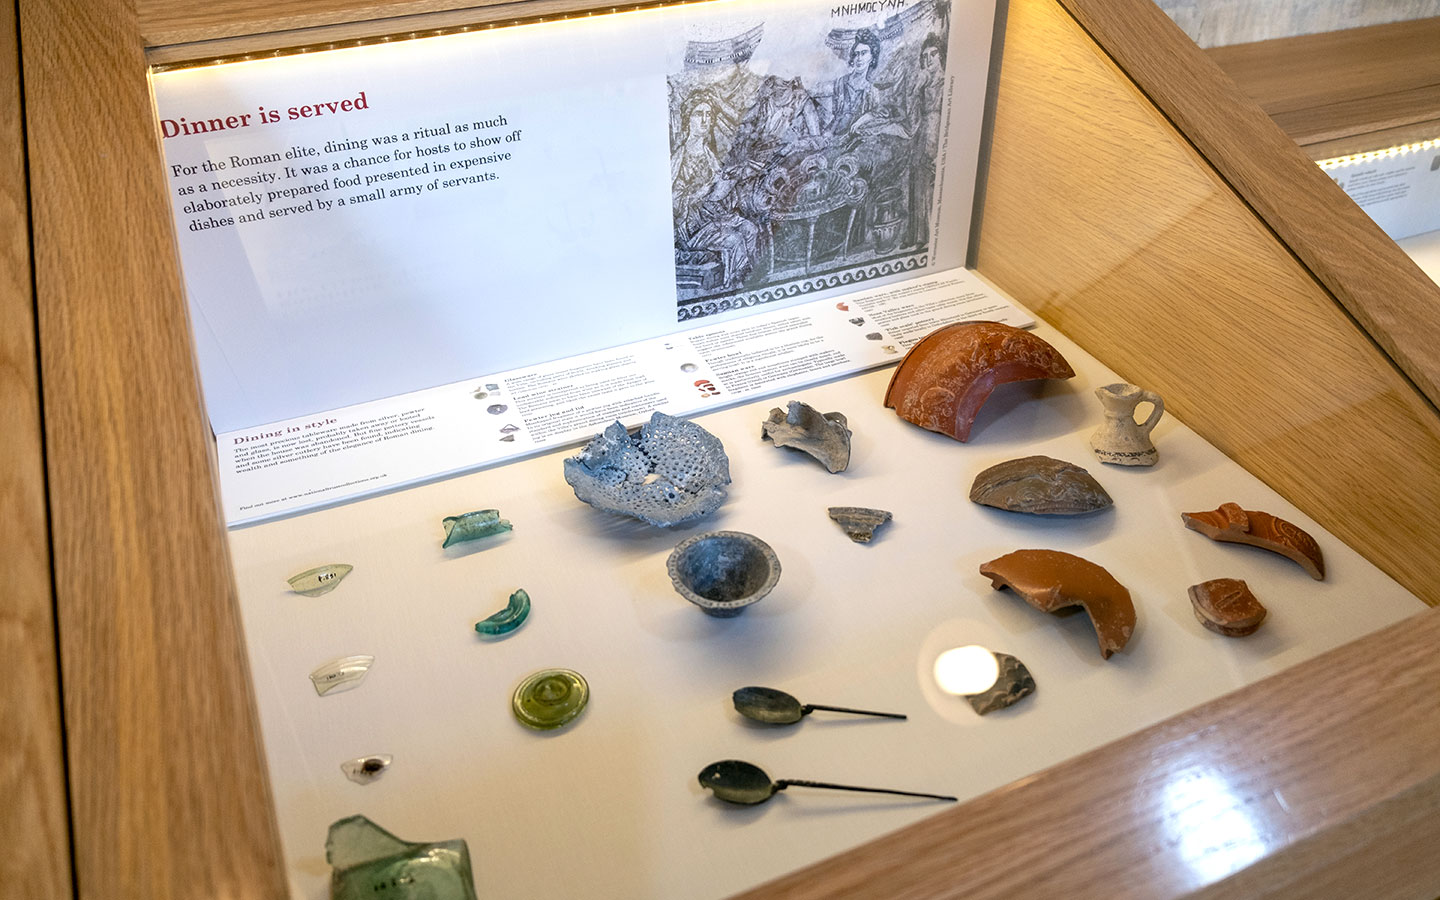 Finds in the museum at Chedworth Roman Villa